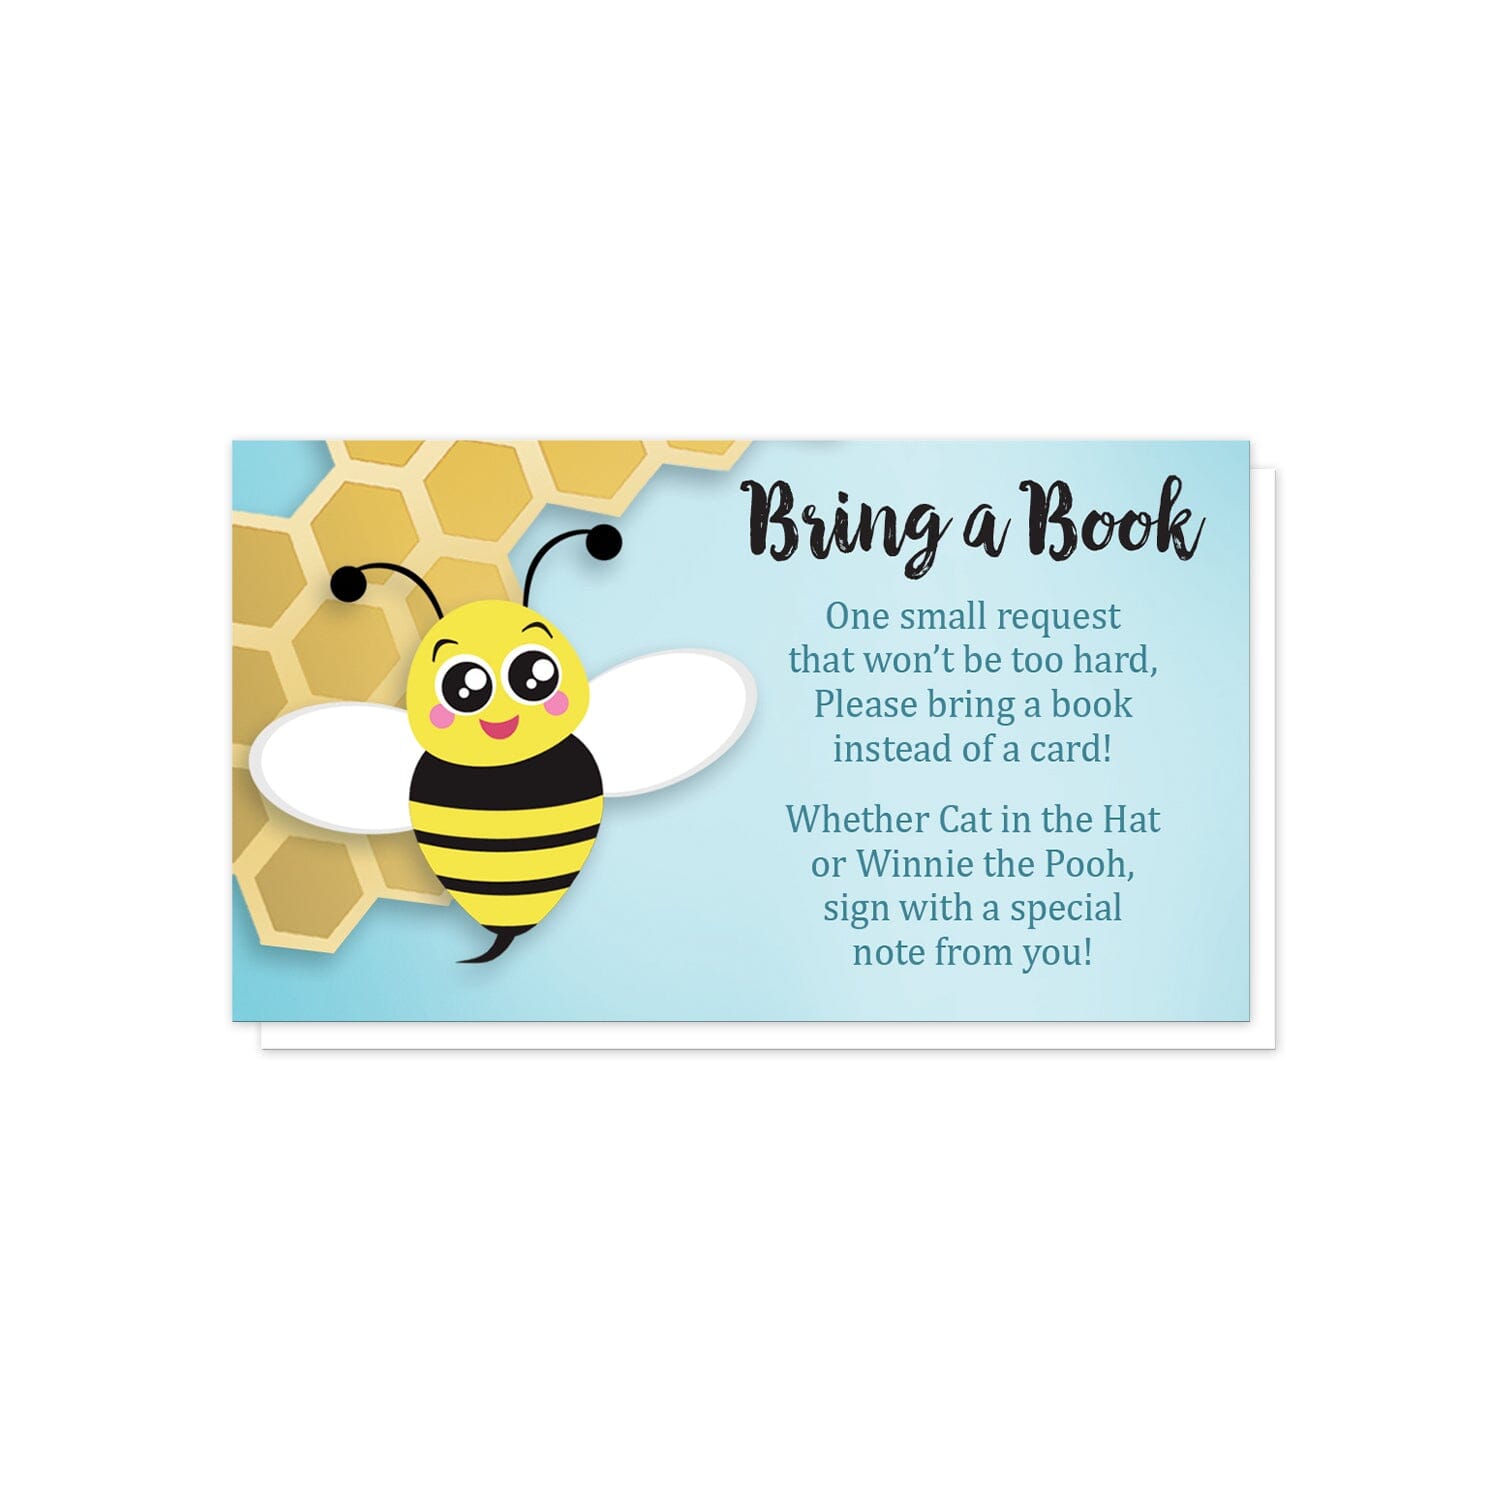 Cute Honeycomb Bee Bring a Book Cards at Artistically Invited. Cute honeycomb bee bring a book cards illustrated with an adorable bee over an irregular honeycomb corner design on a turquoise gradient background. Your book request details are printed in black and dark turquoise over the background color to the right of the bee.